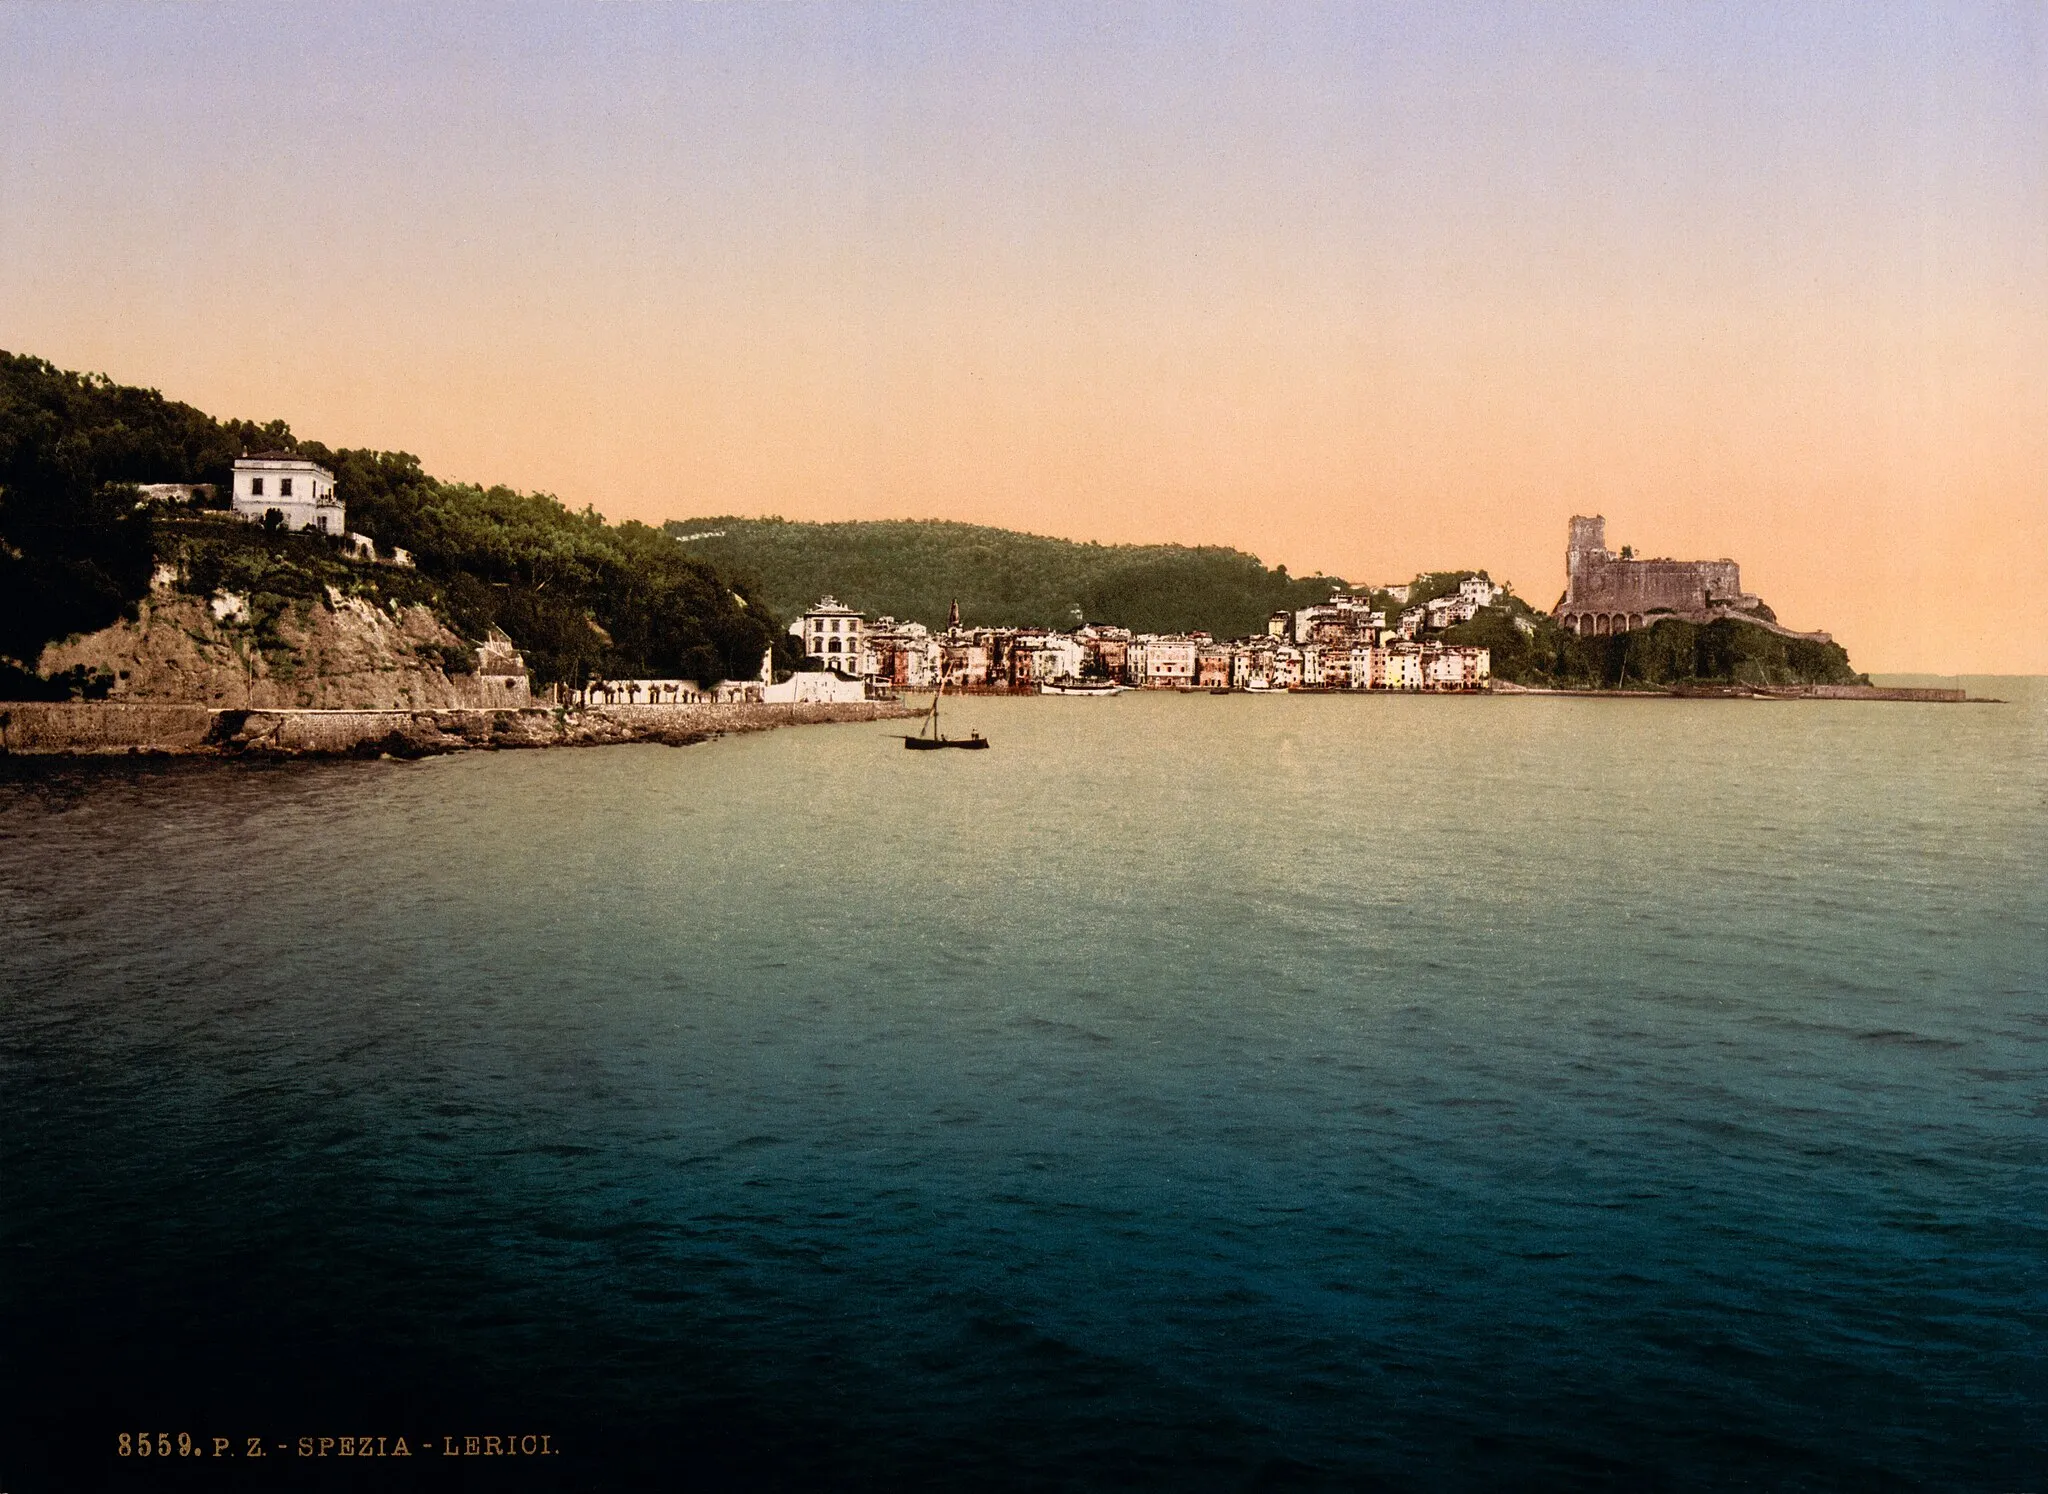 Photo showing: 8589 P.Z. Spezia, Lerici. Photochrom print by Photoglob Zürich, between 1890 and 1900.
From the Photochrom Prints Collection at the Library of Congress
More photochroms from Italy | More photochrom prints

[PD] This picture is in the public domain.